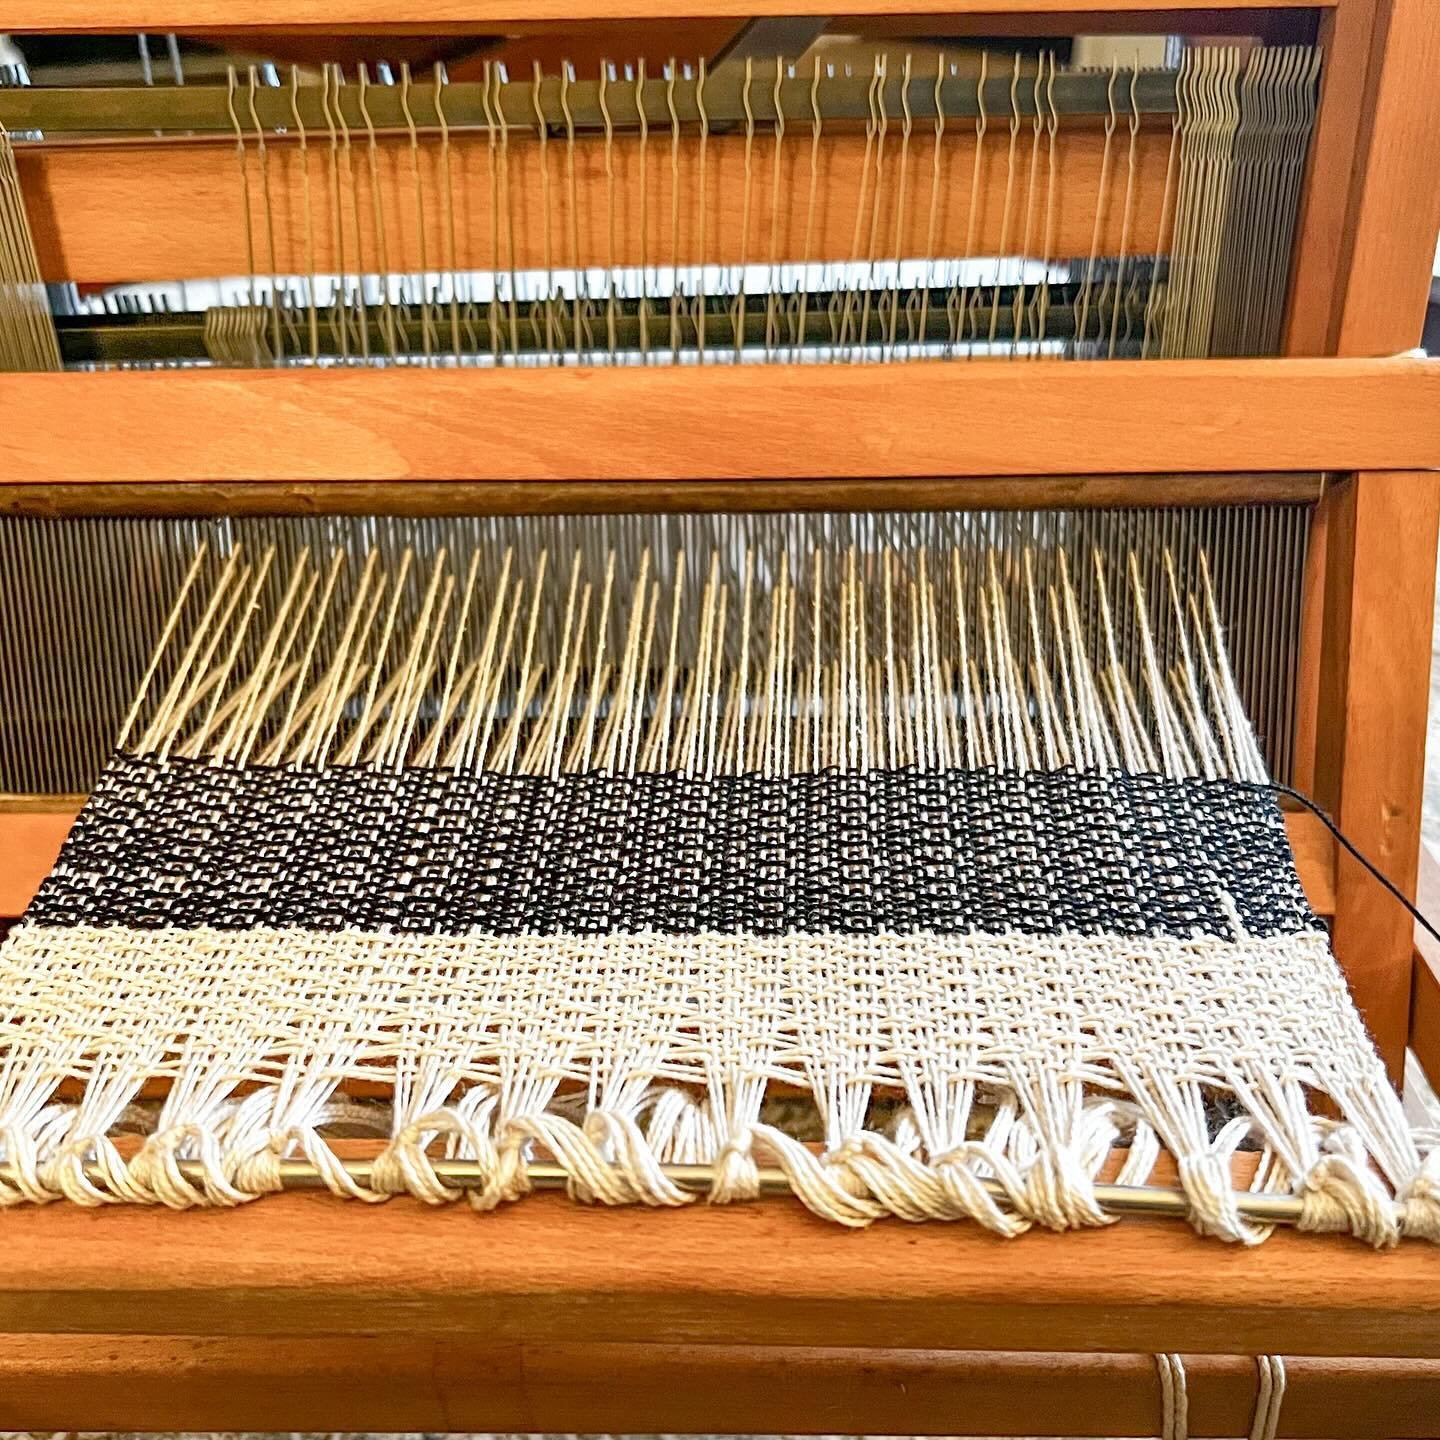 Largest weaving that I&rsquo;ve done on the baby loom! Each weaving on this machine has taught me so much. It is a lovely process! #weaving #tableloom #reversetwillweave